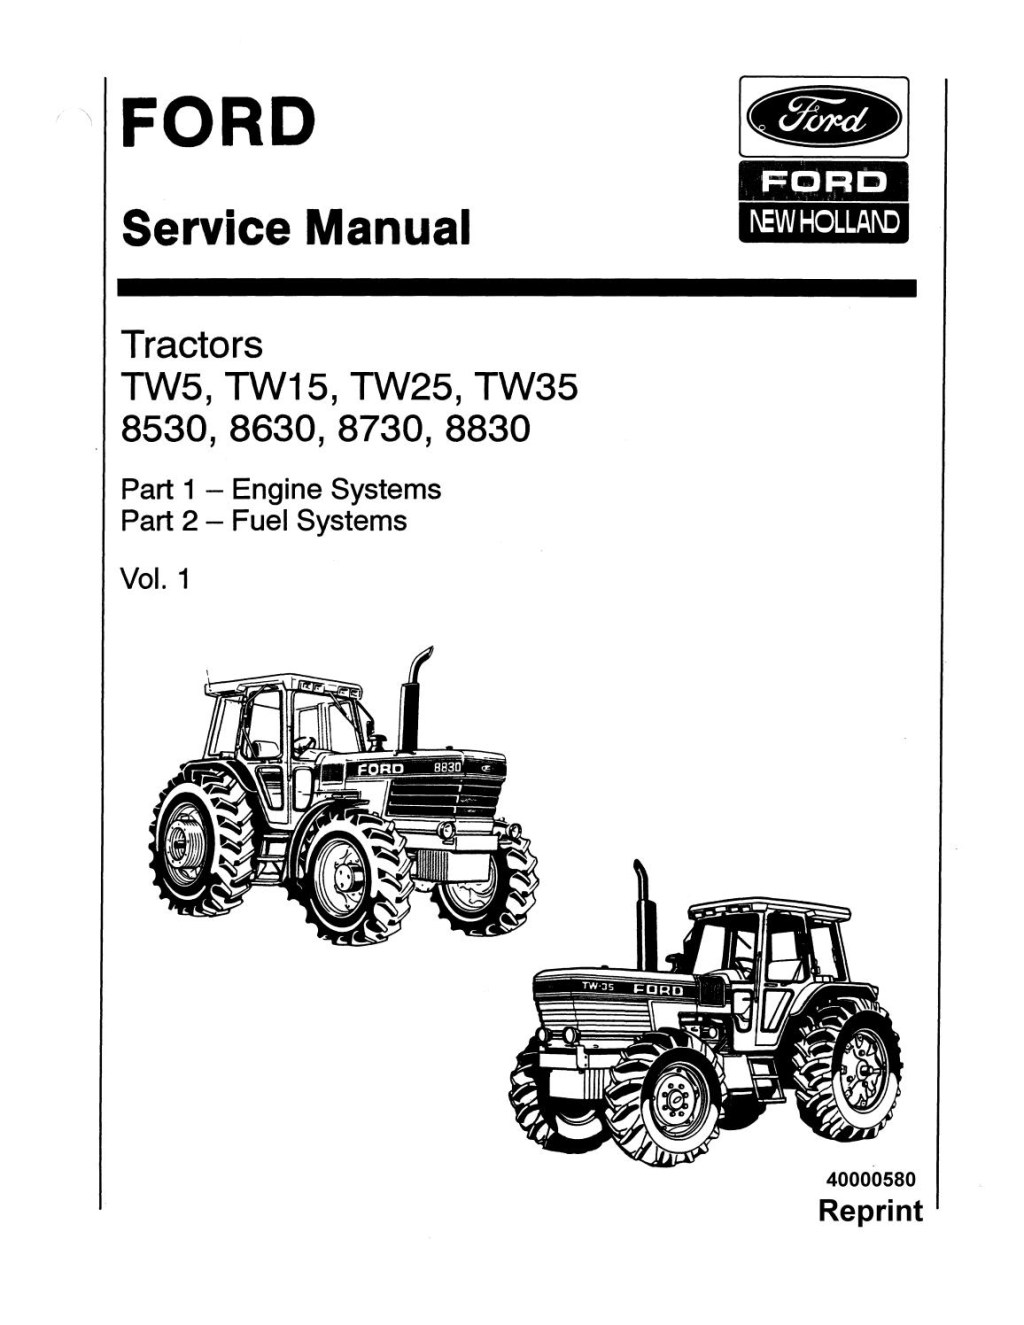 Picture of: Ford New Holland TW Tractor Service Repair Manual by